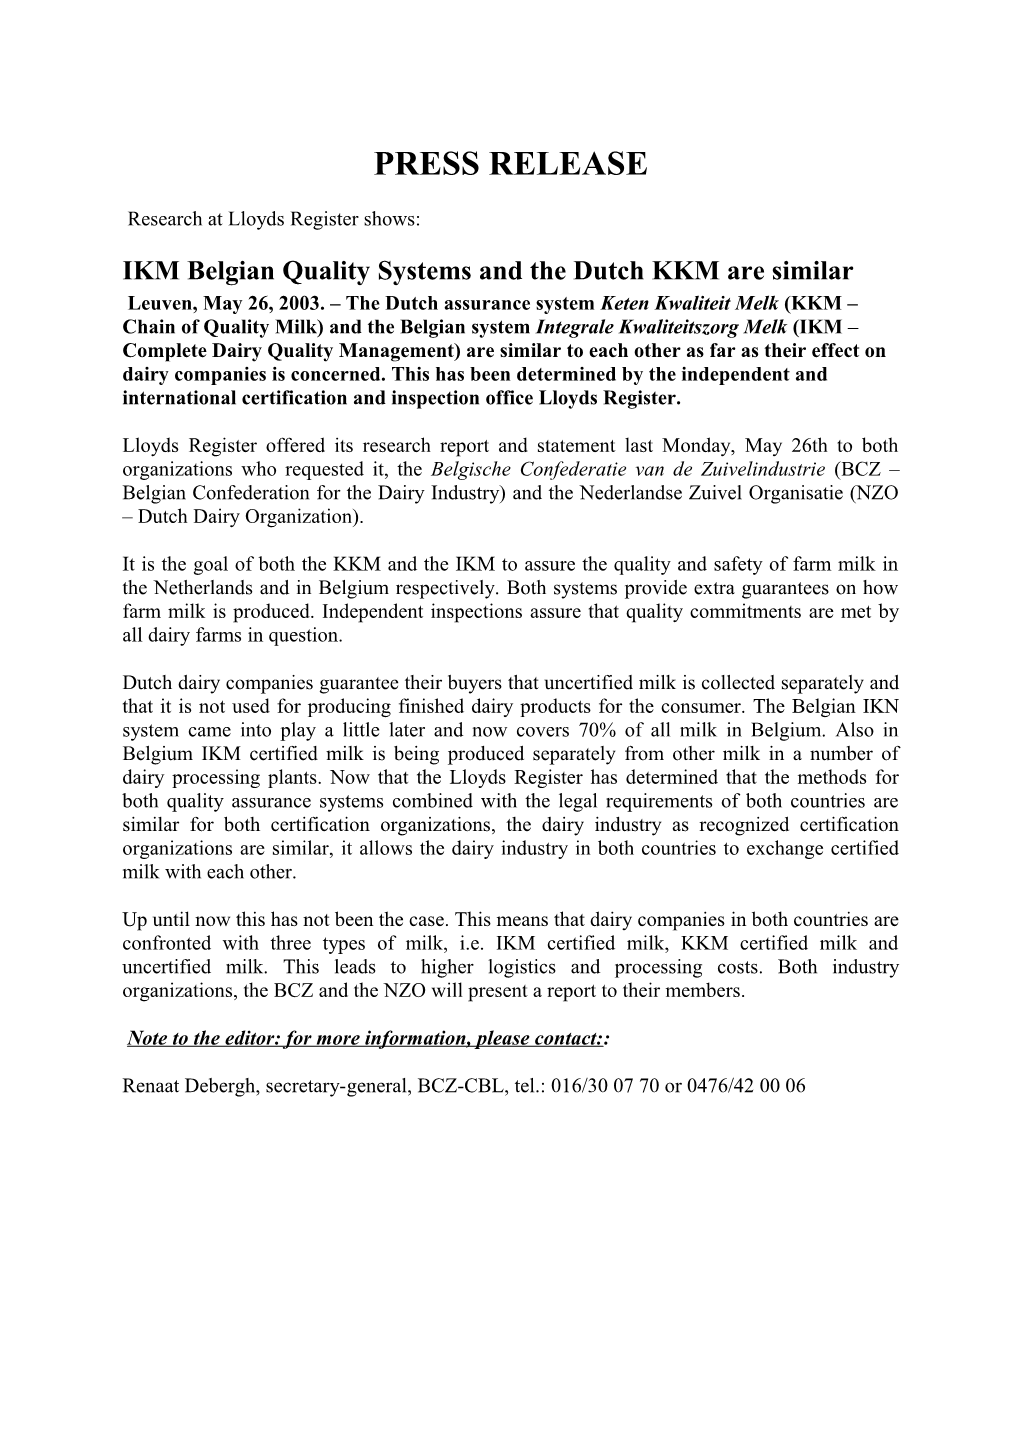 IKM Belgian Quality Systems and the Dutch KKM Are Similar